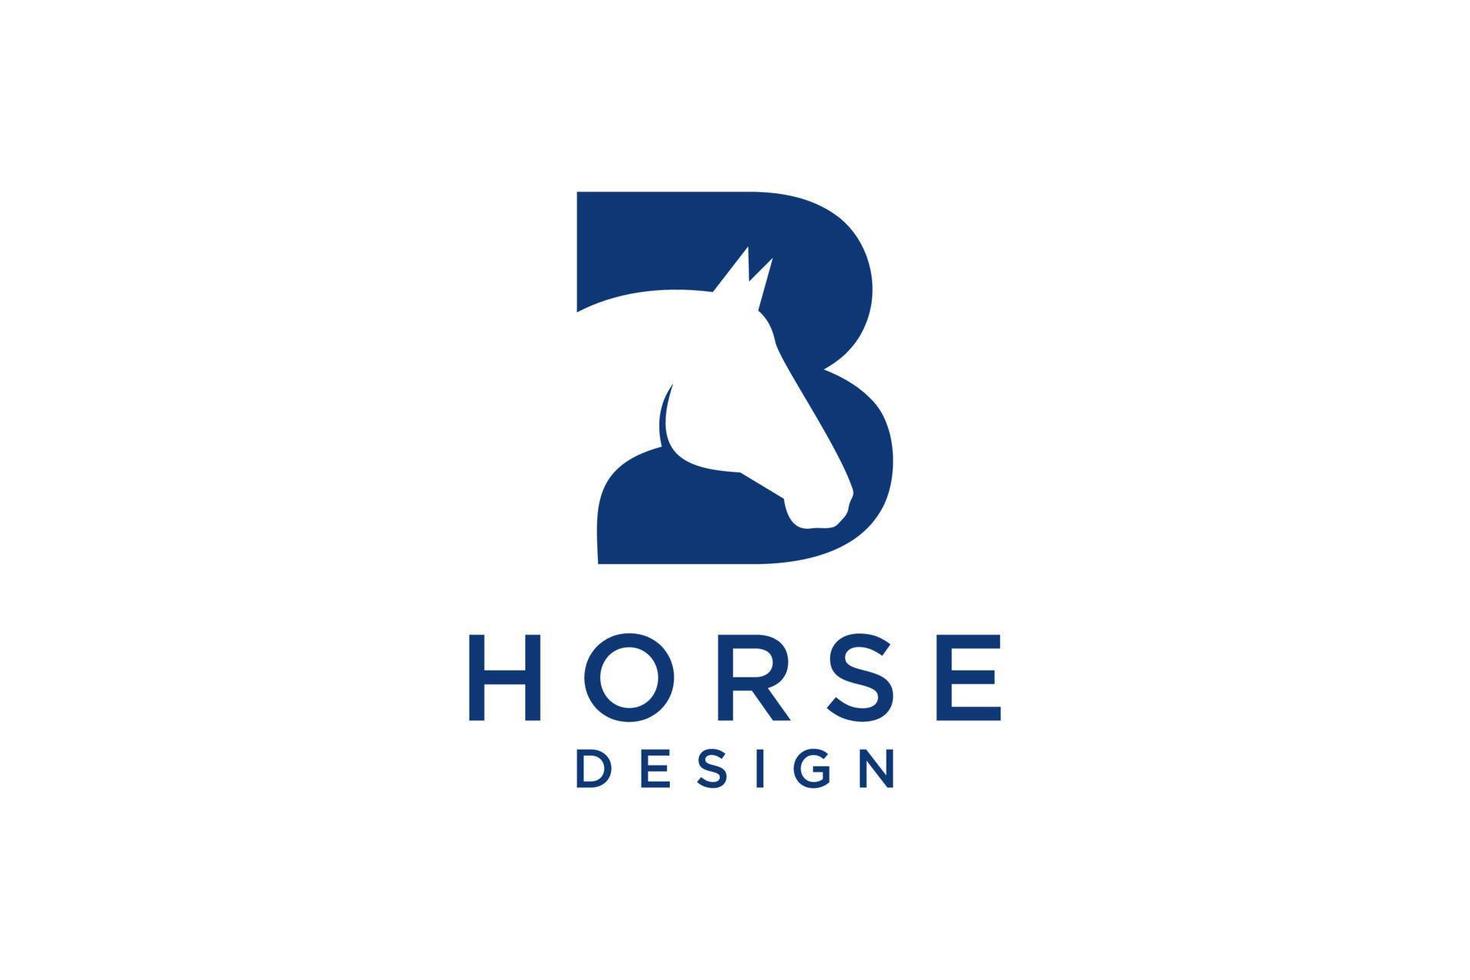 The logo design with the initial letter B is combined with a modern and professional horse head symbol vector